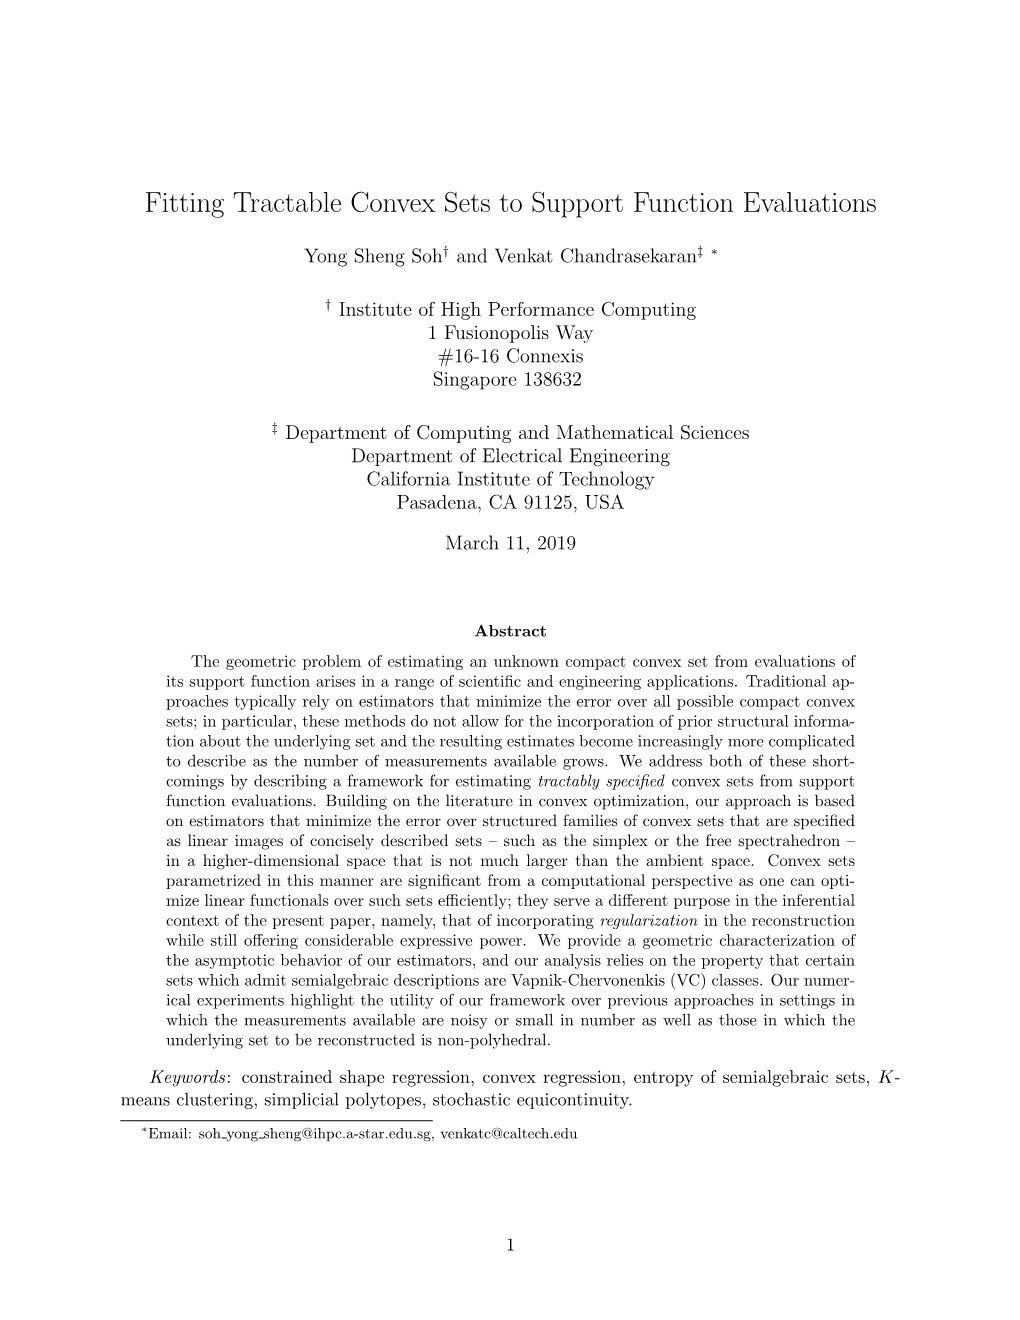 Fitting Tractable Convex Sets to Support Function Evaluations